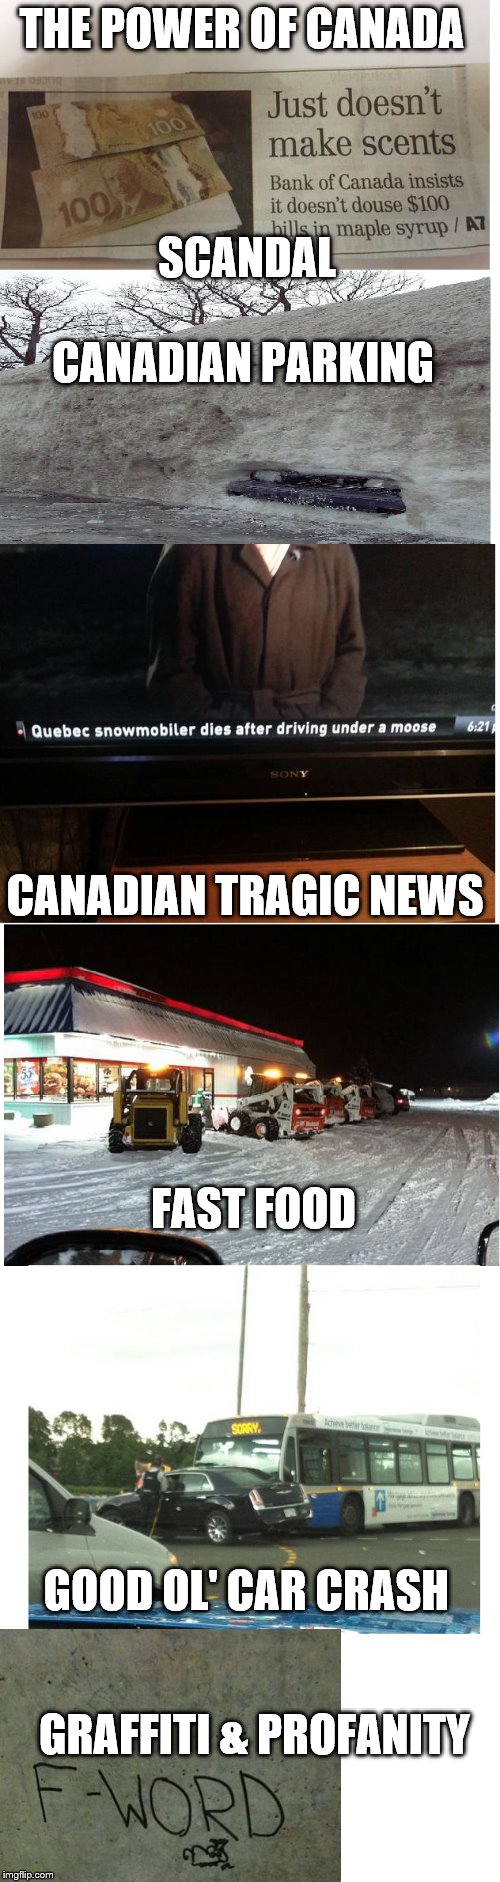  THE POWER OF CANADA; SCANDAL; CANADIAN PARKING; CANADIAN TRAGIC NEWS; FAST FOOD; GOOD OL' CAR CRASH; GRAFFITI & PROFANITY | image tagged in memes,canadian,funny | made w/ Imgflip meme maker